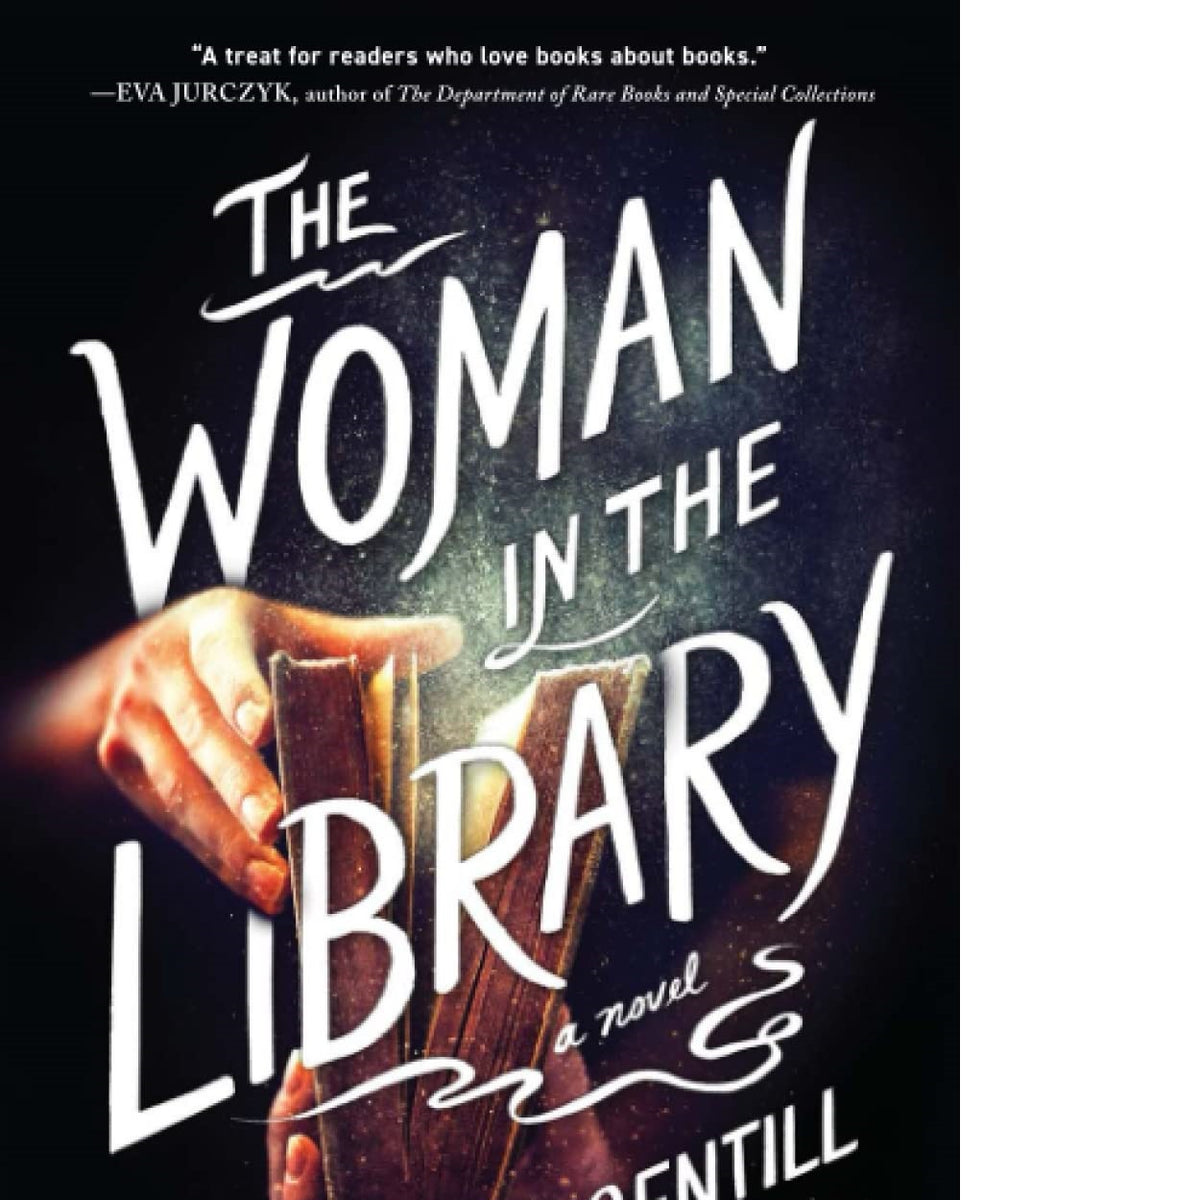 Book Review: The Woman in the Library by Sulari Gentill